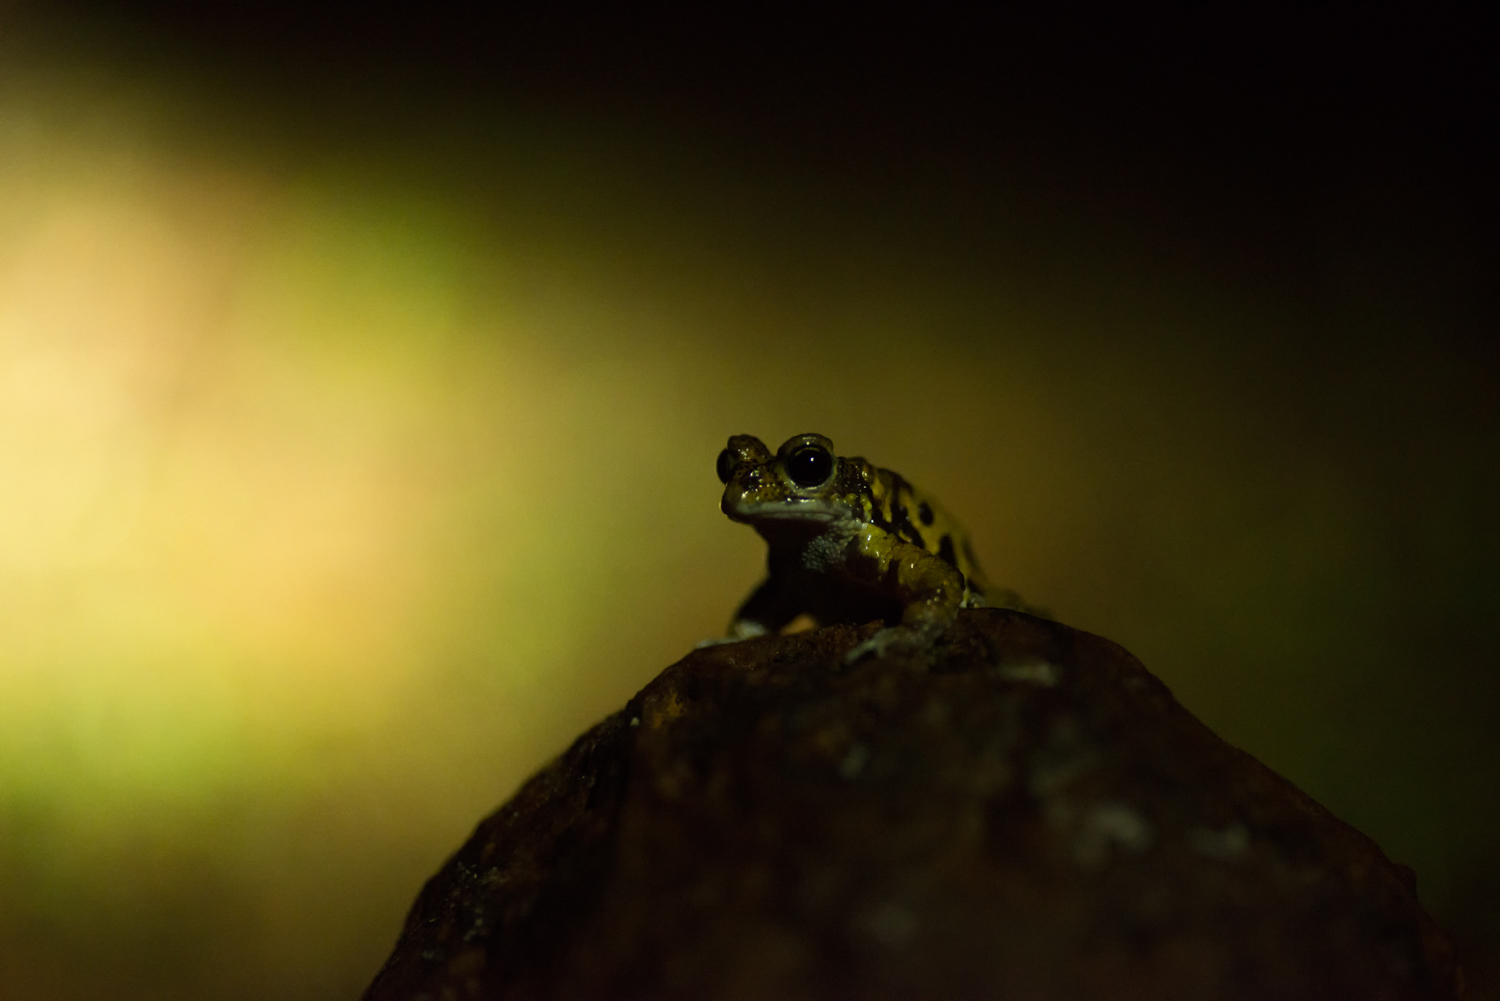  Washed clean by the rains, the plateau is a haven for frogs.  Xanthophryne tigerina , endemic to the Northern Western Ghats calls over the din of the rain, signaling to potential females on the plateau. 